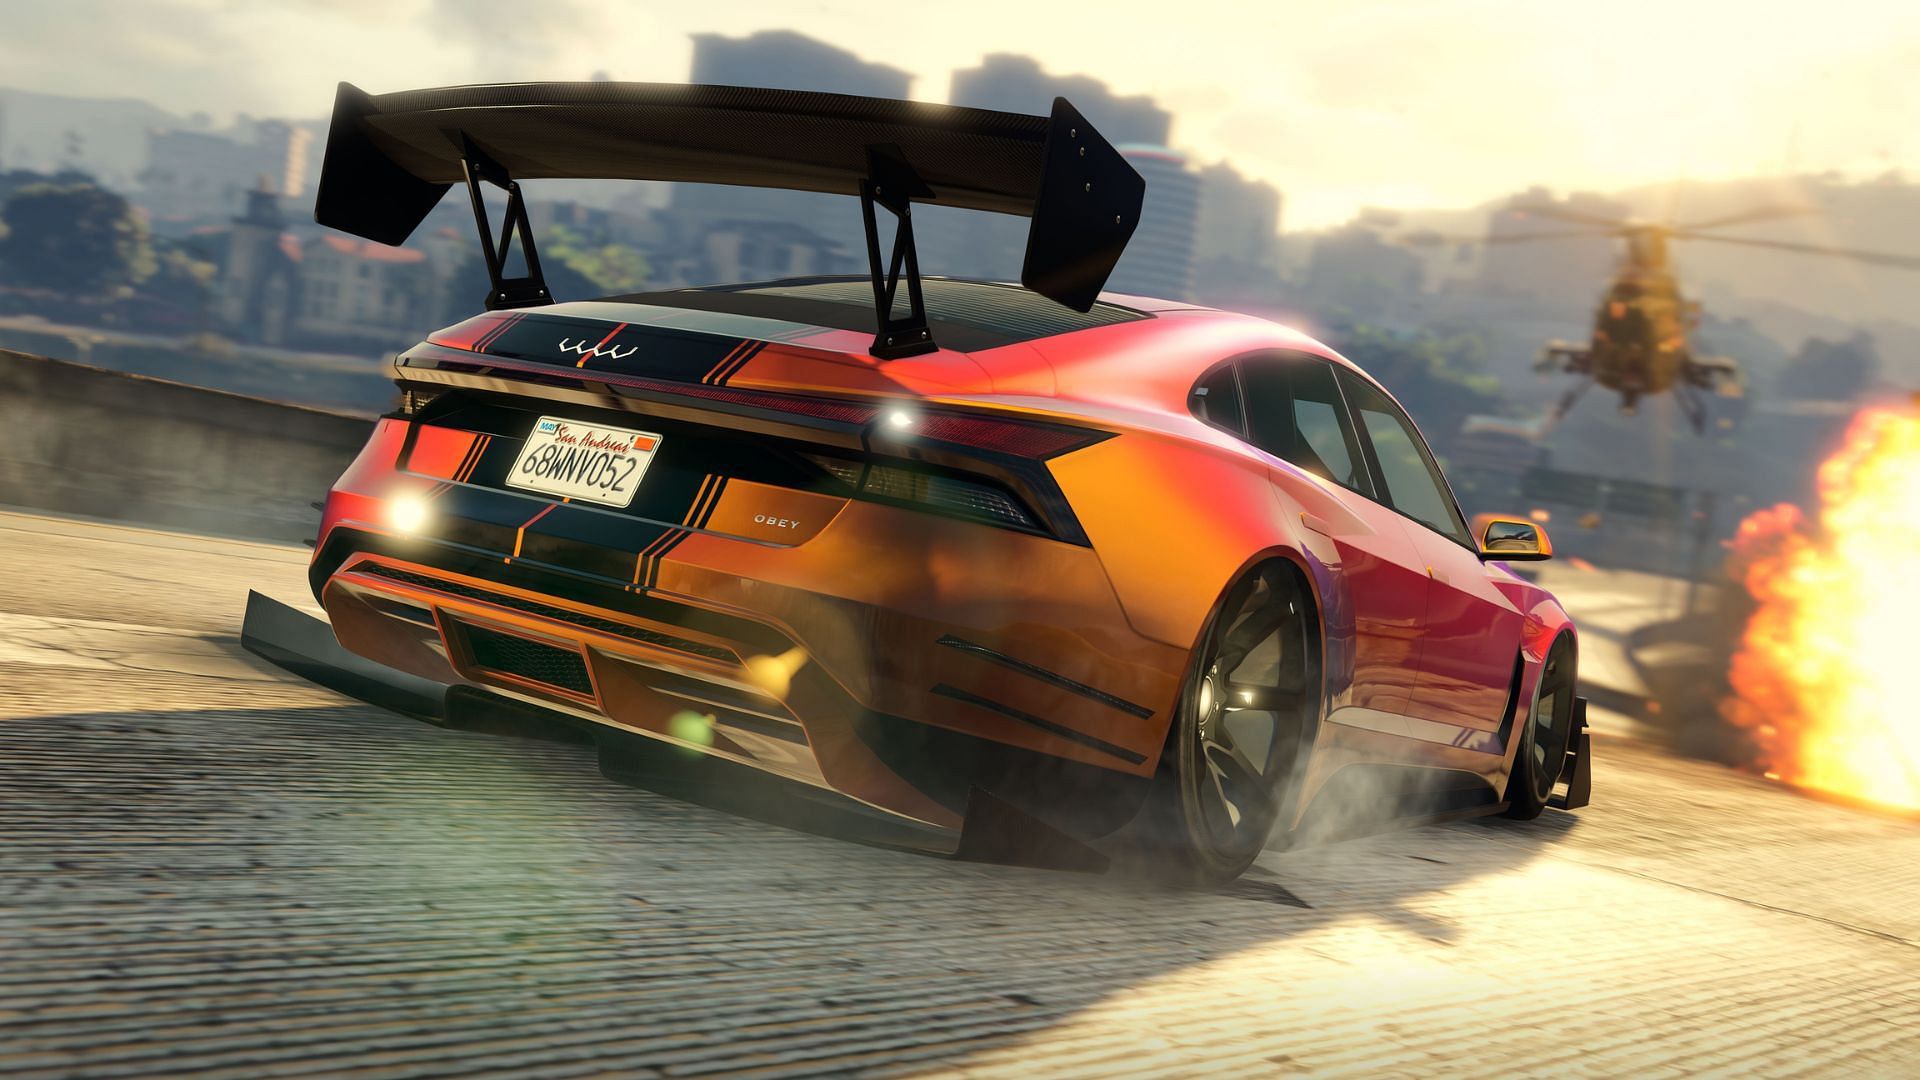 An image showing a glimpse of a possible new car in GTA Online (Image via Rockstar Games)